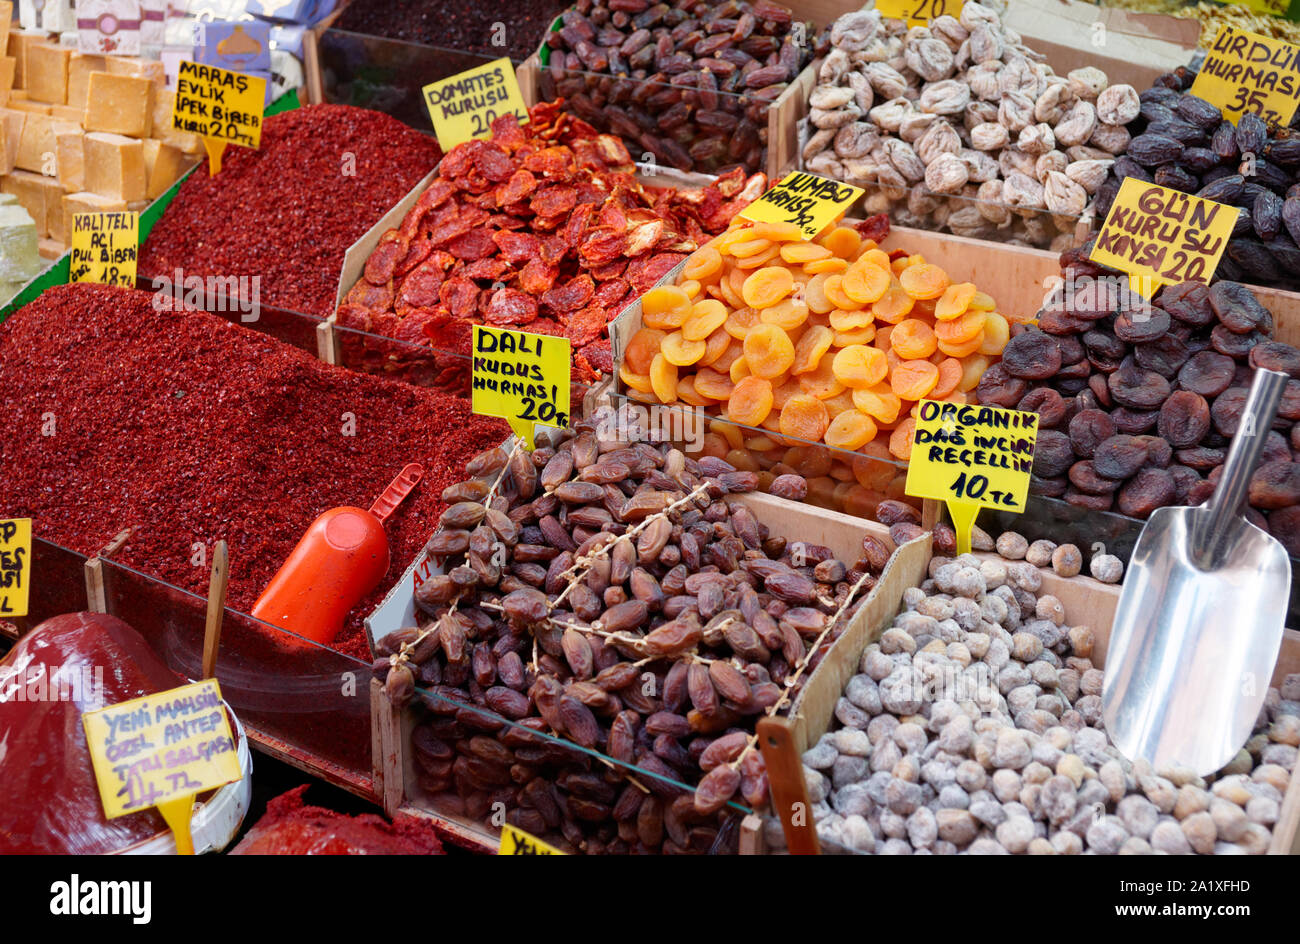 Dried fruits and spices on Turkish market shelf Stock Photo